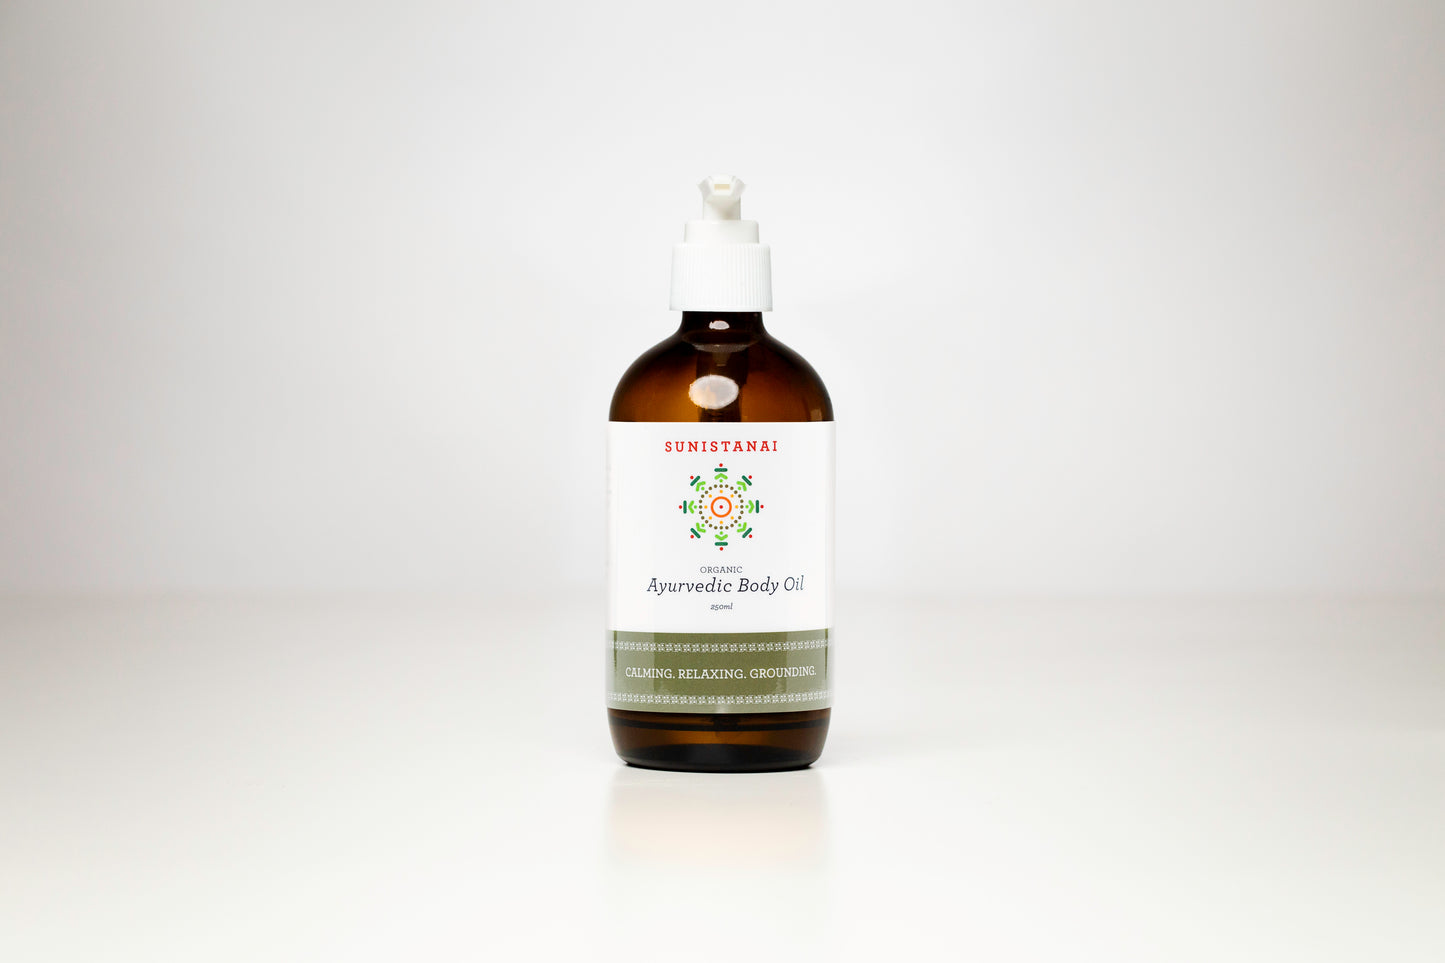 The Ayurvedic Body Oil is a tri-doshic blend made to nourish the skin, reduce inflammation, and provide relief from stress or topical trauma. This oil is a grounding oil and when applied enhances presence and warms the body.